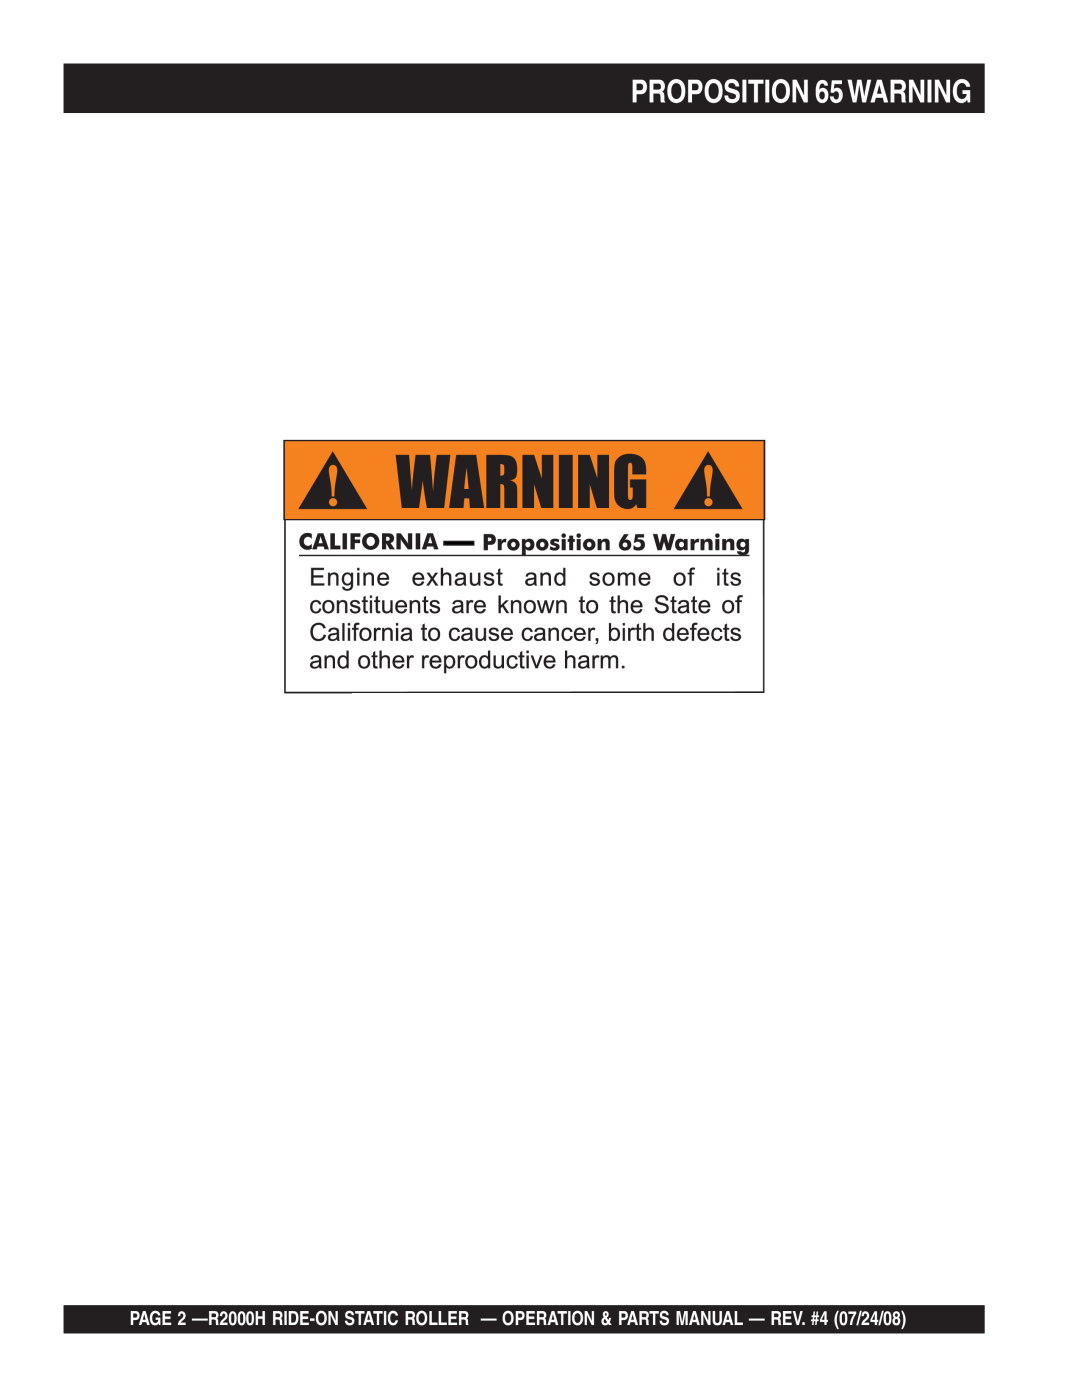 Multiquip R2000H manual PROPOSITION 65WARNING 